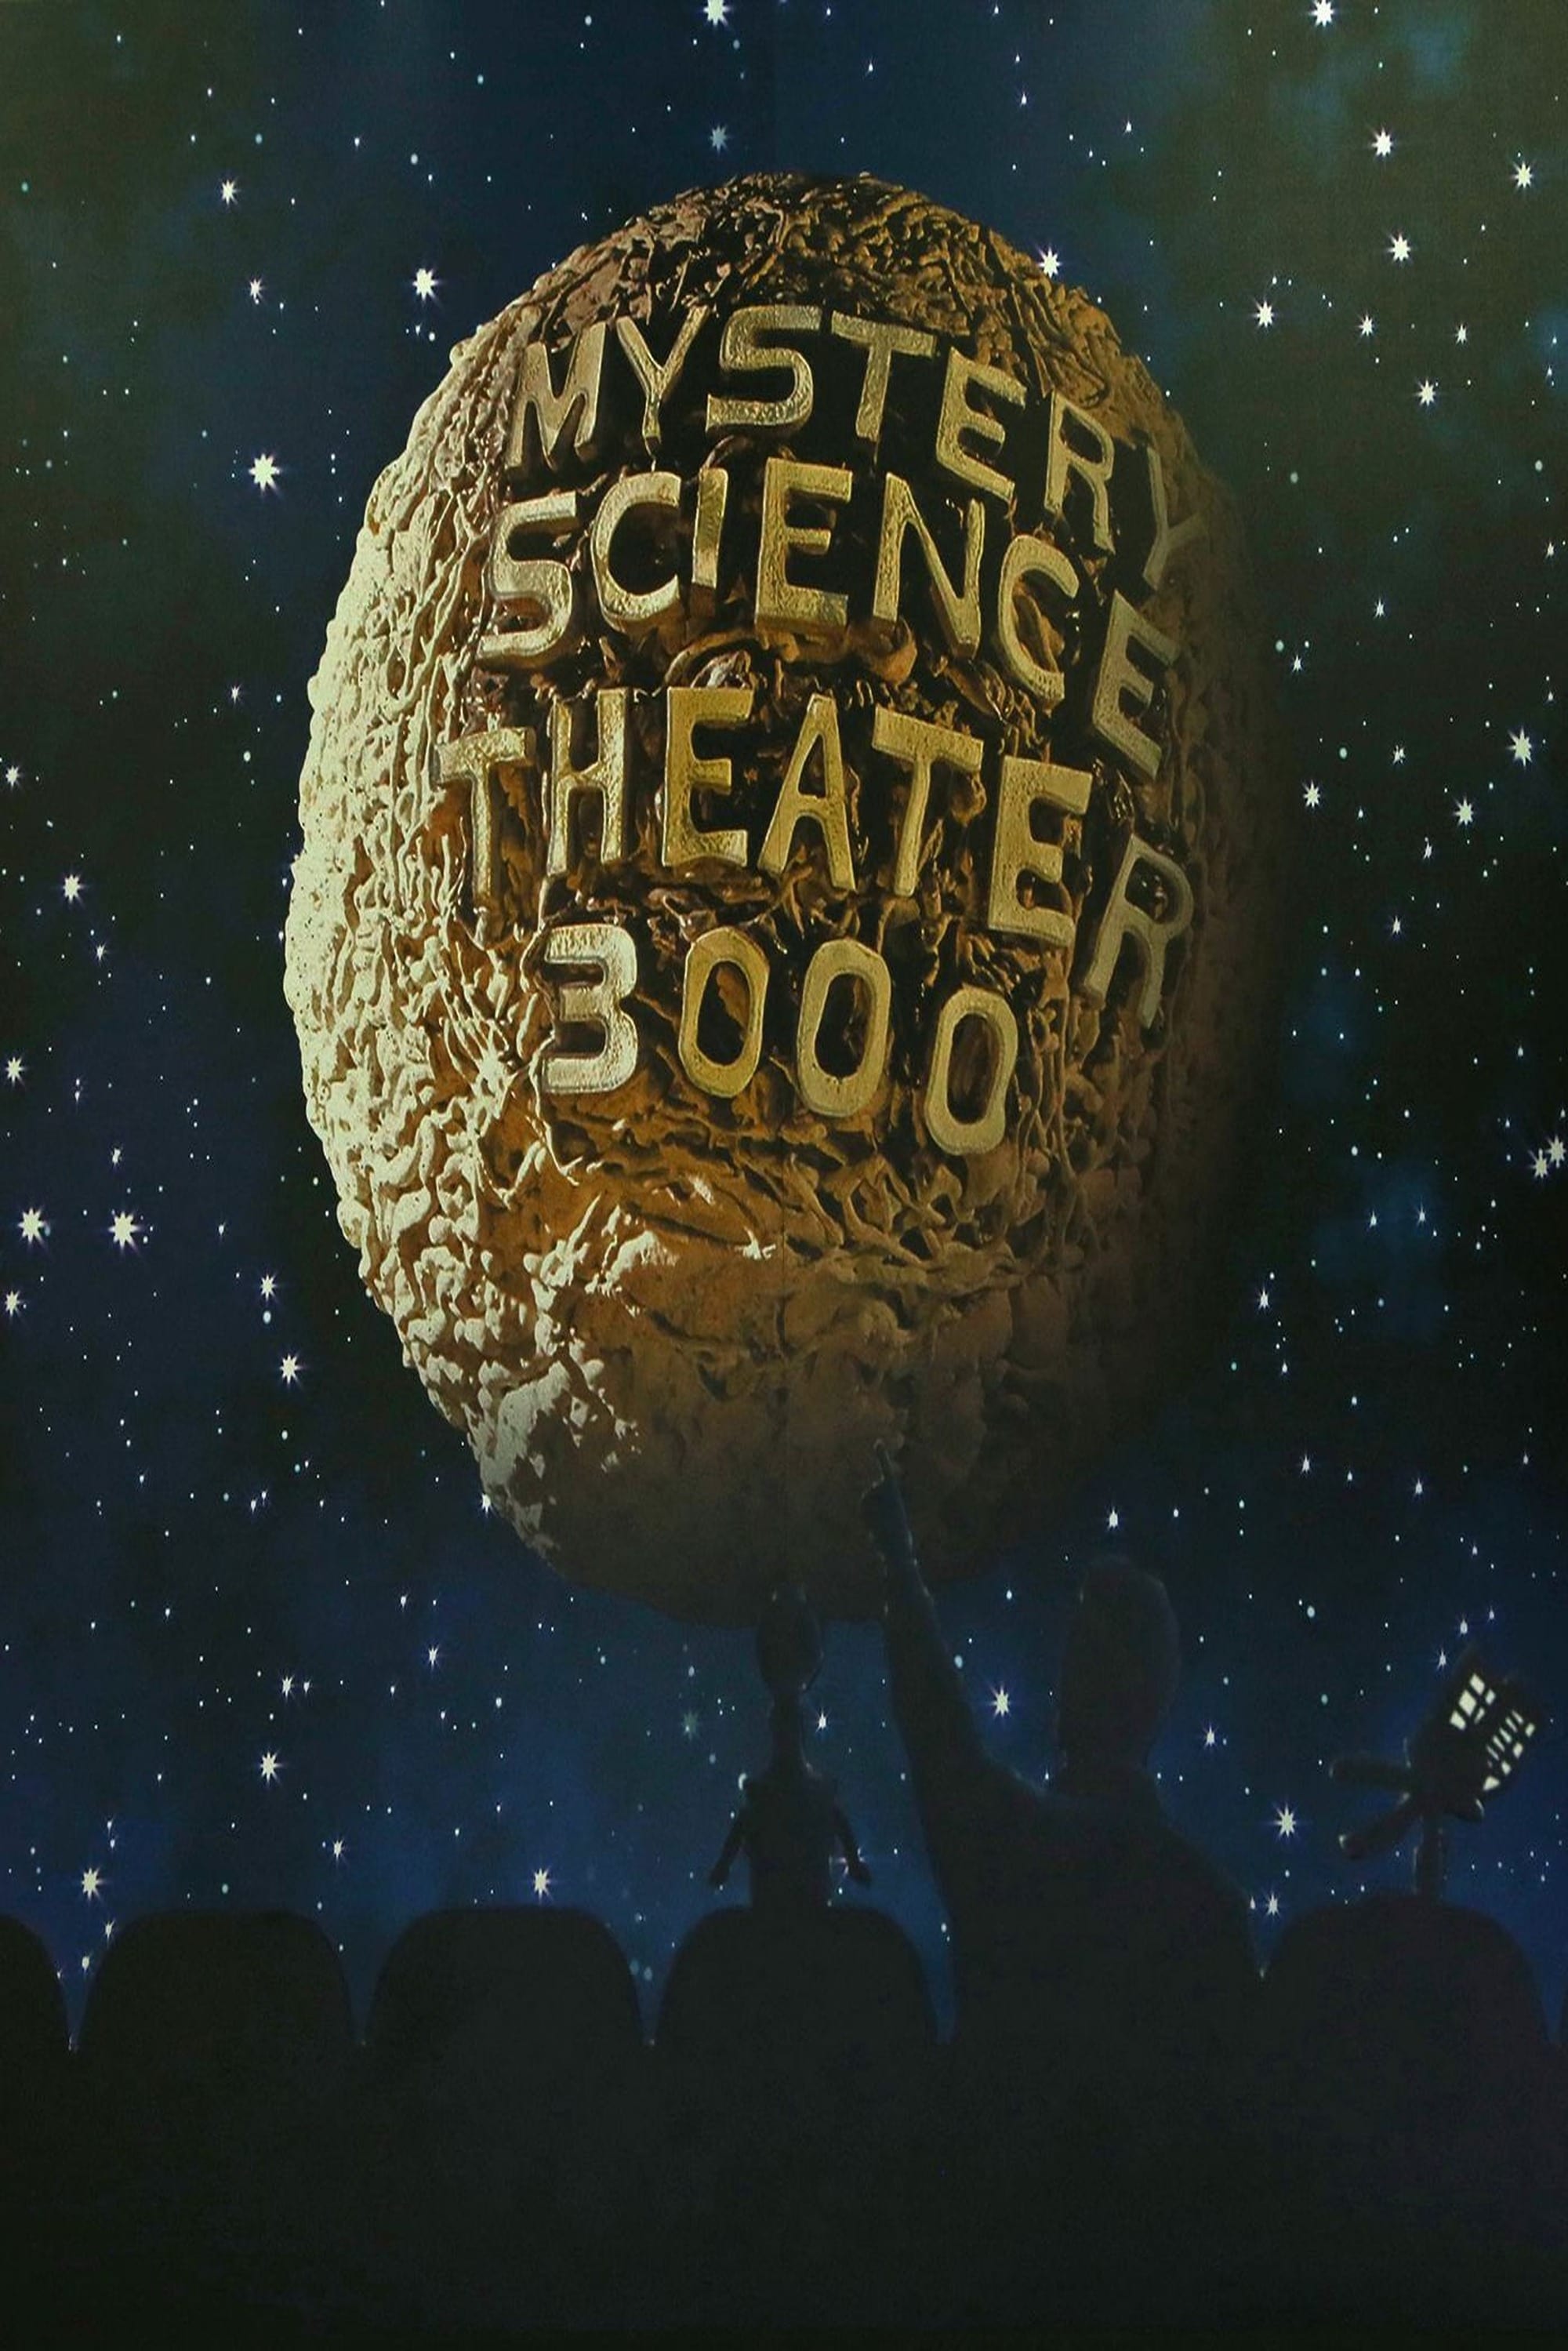 Mystery Science Theater 3000: Phase IV